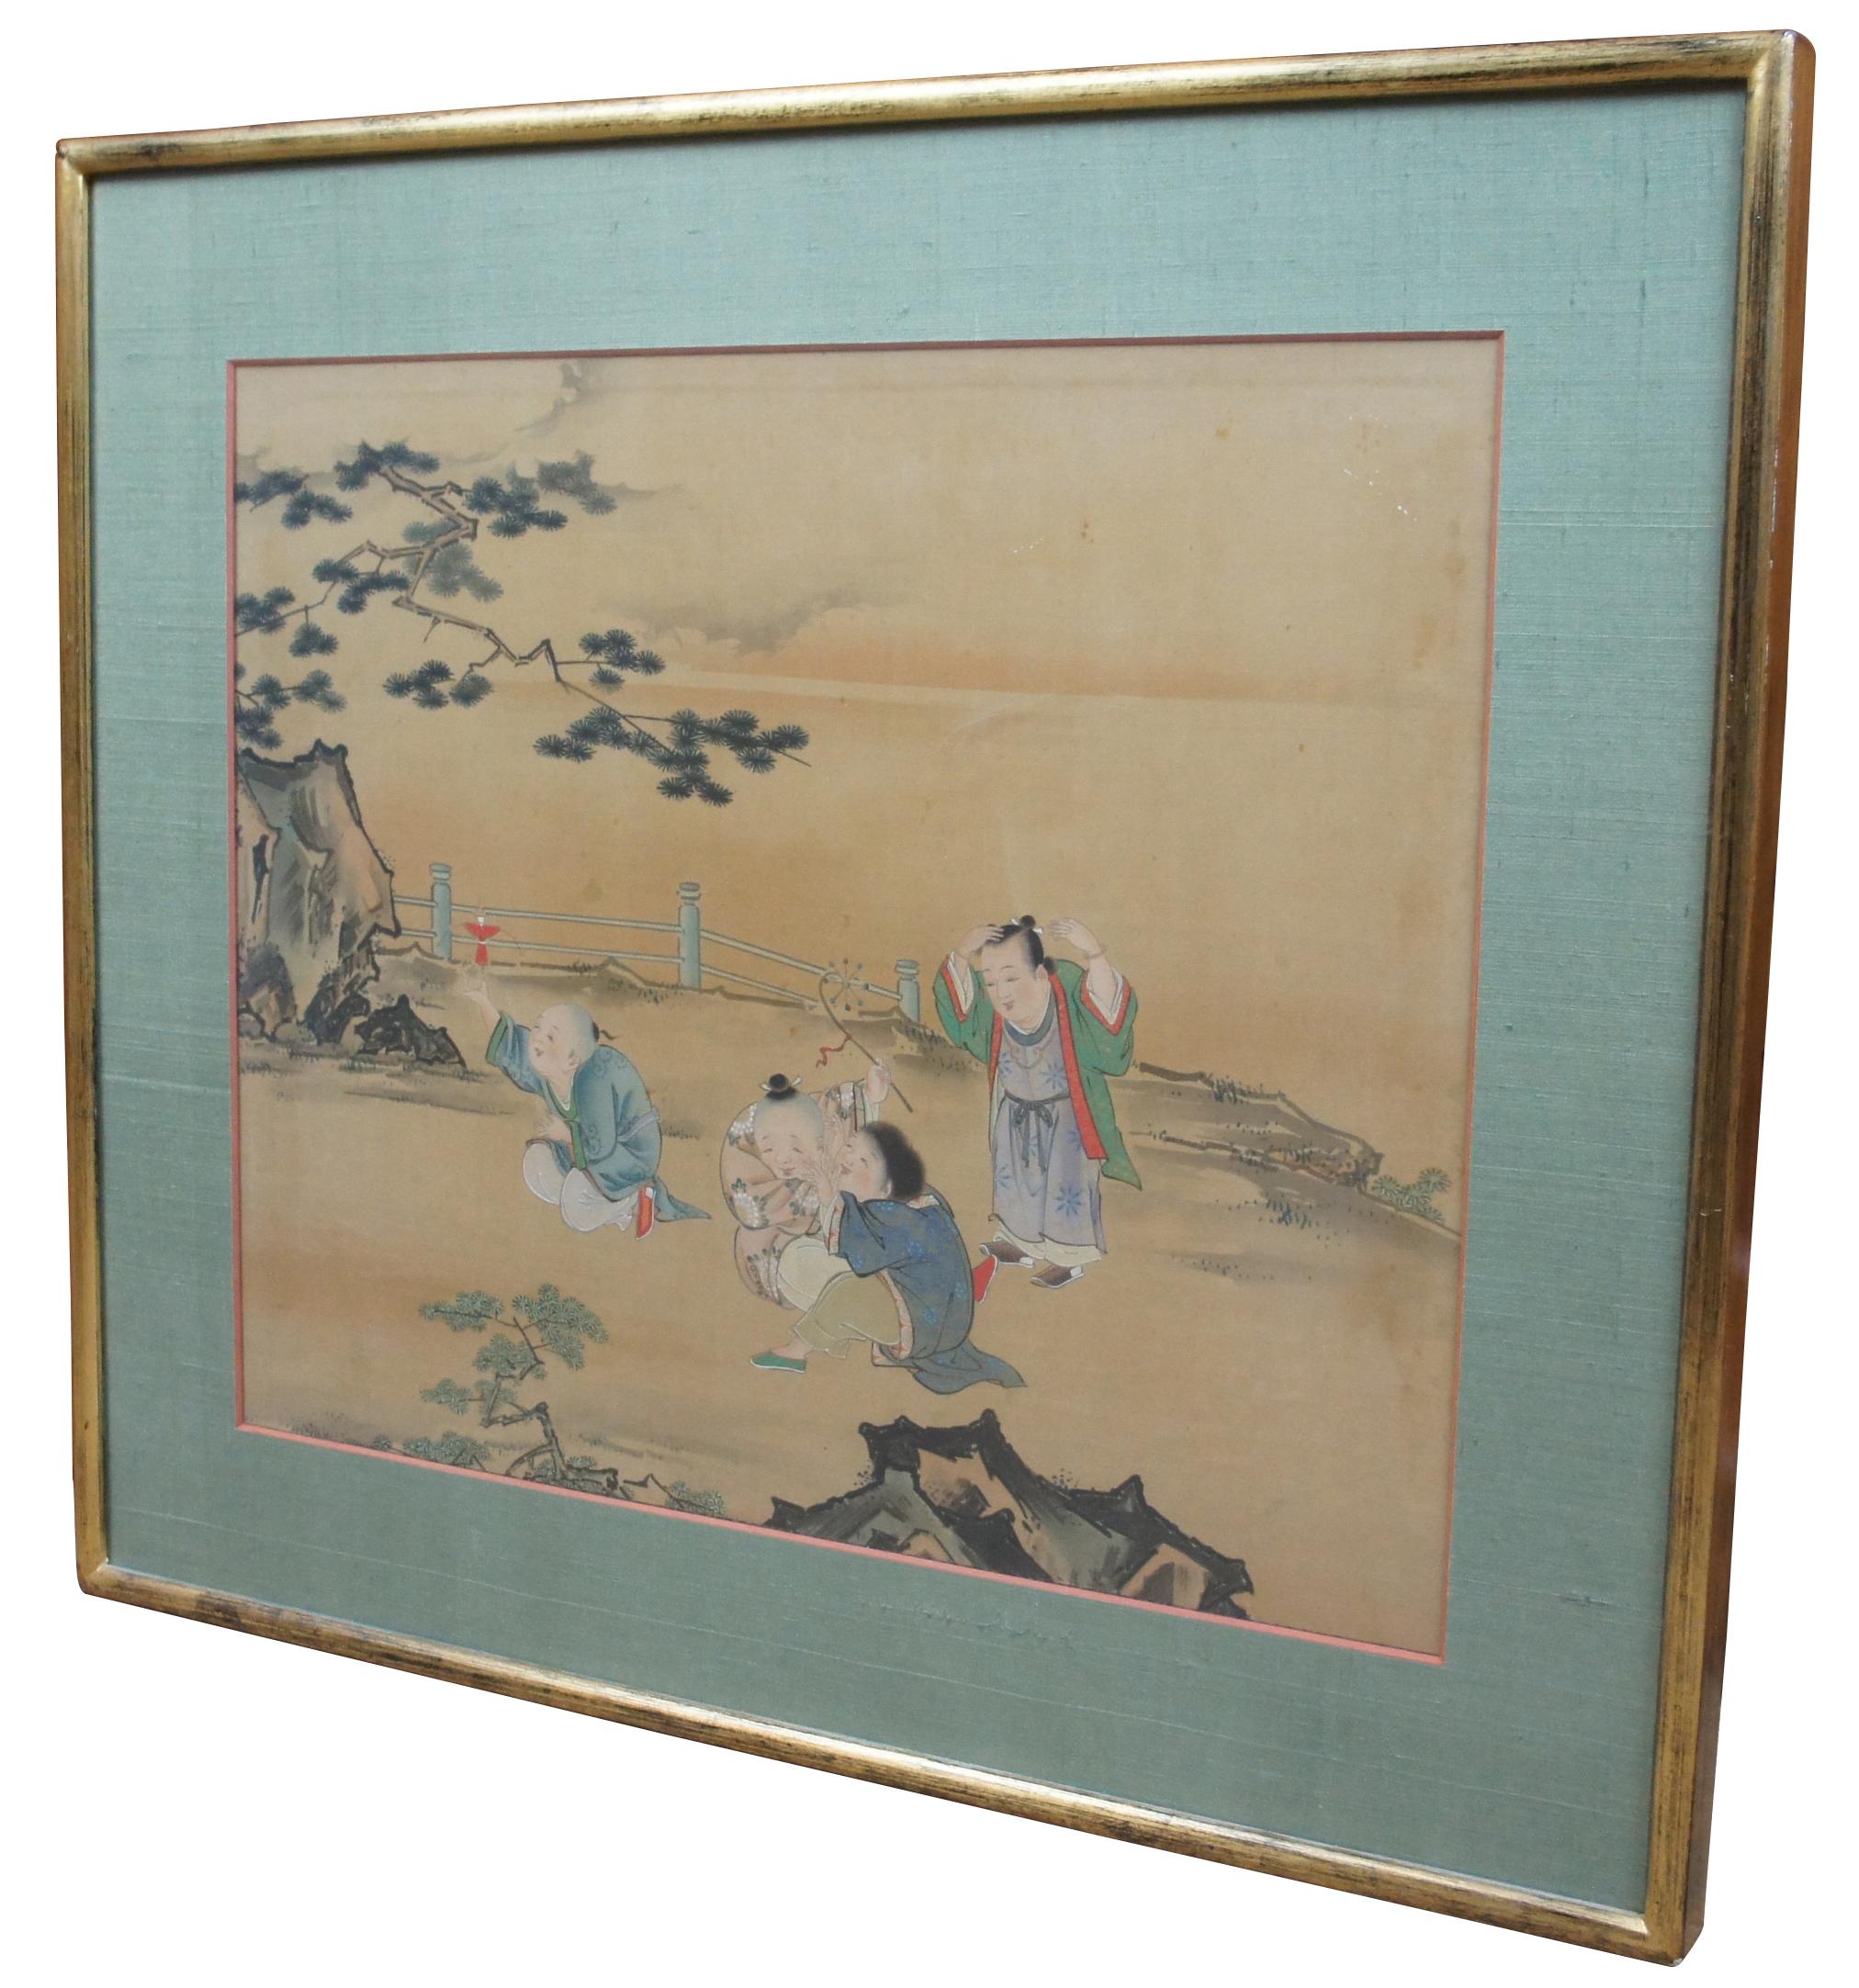 Antique Chinese painting on silk featuring four boys playing with various toys in a landscape with a tree, rocks and fence.

Measures: Sans frame 22” x 18.5.